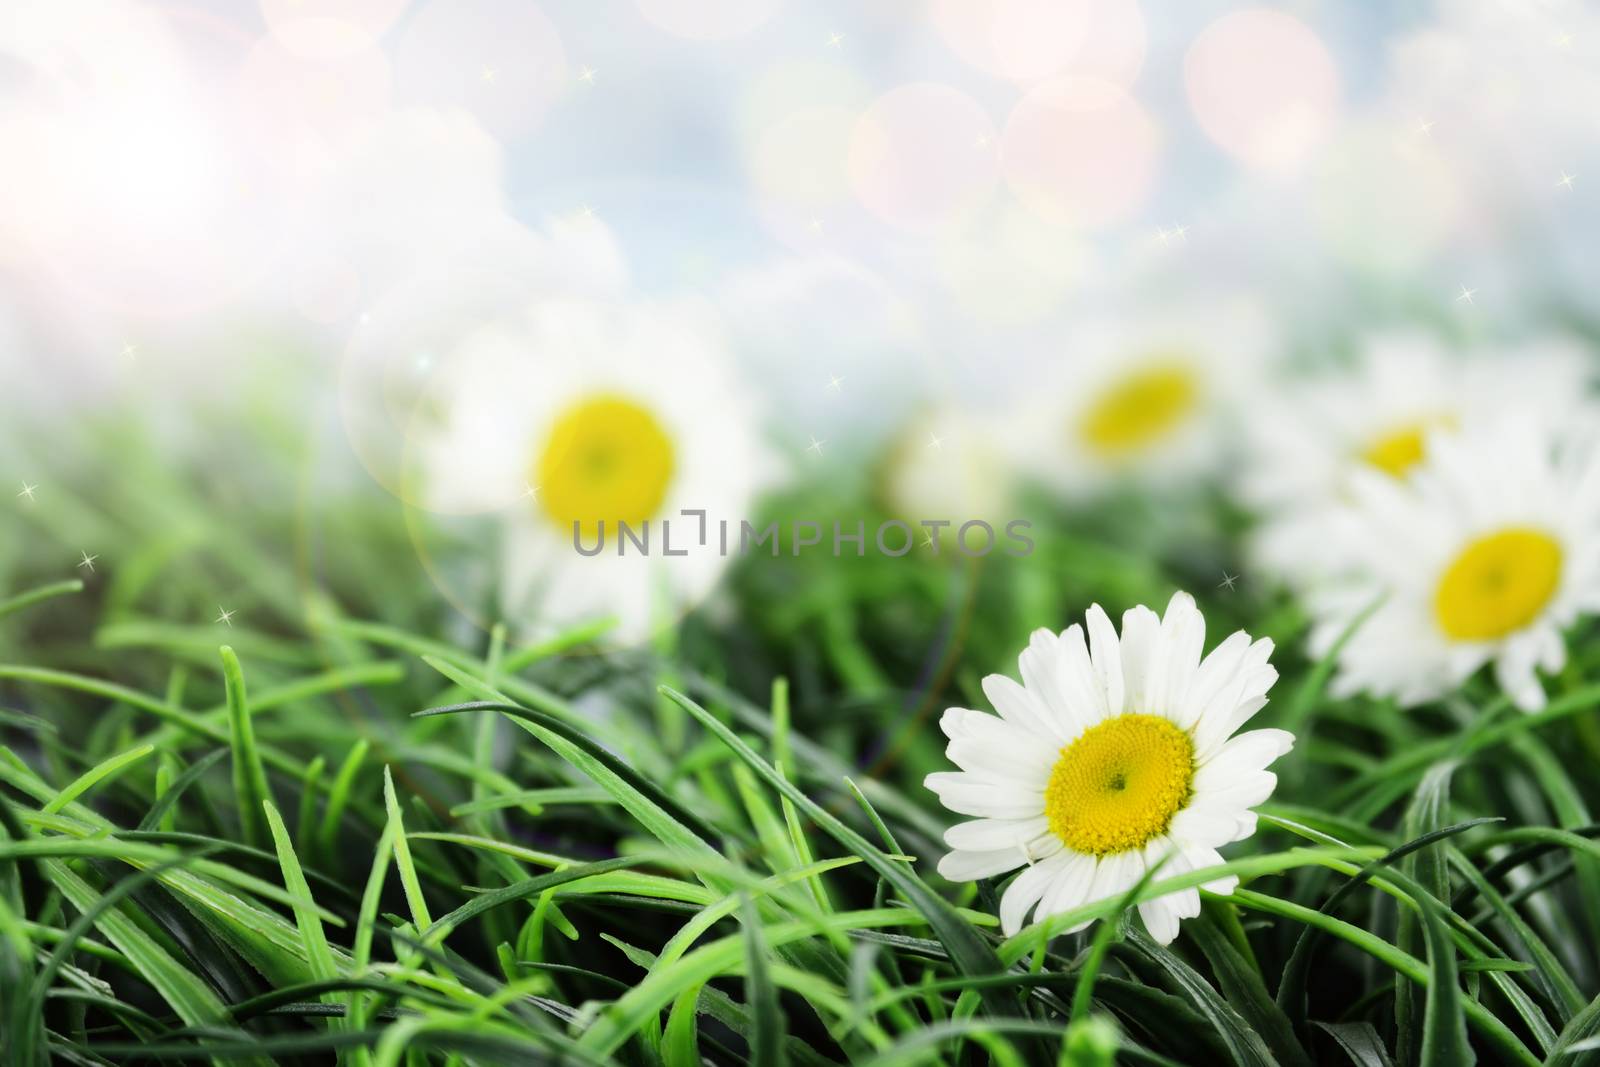 Beautiful white daisies in a field of grass. Shallow depth of field.